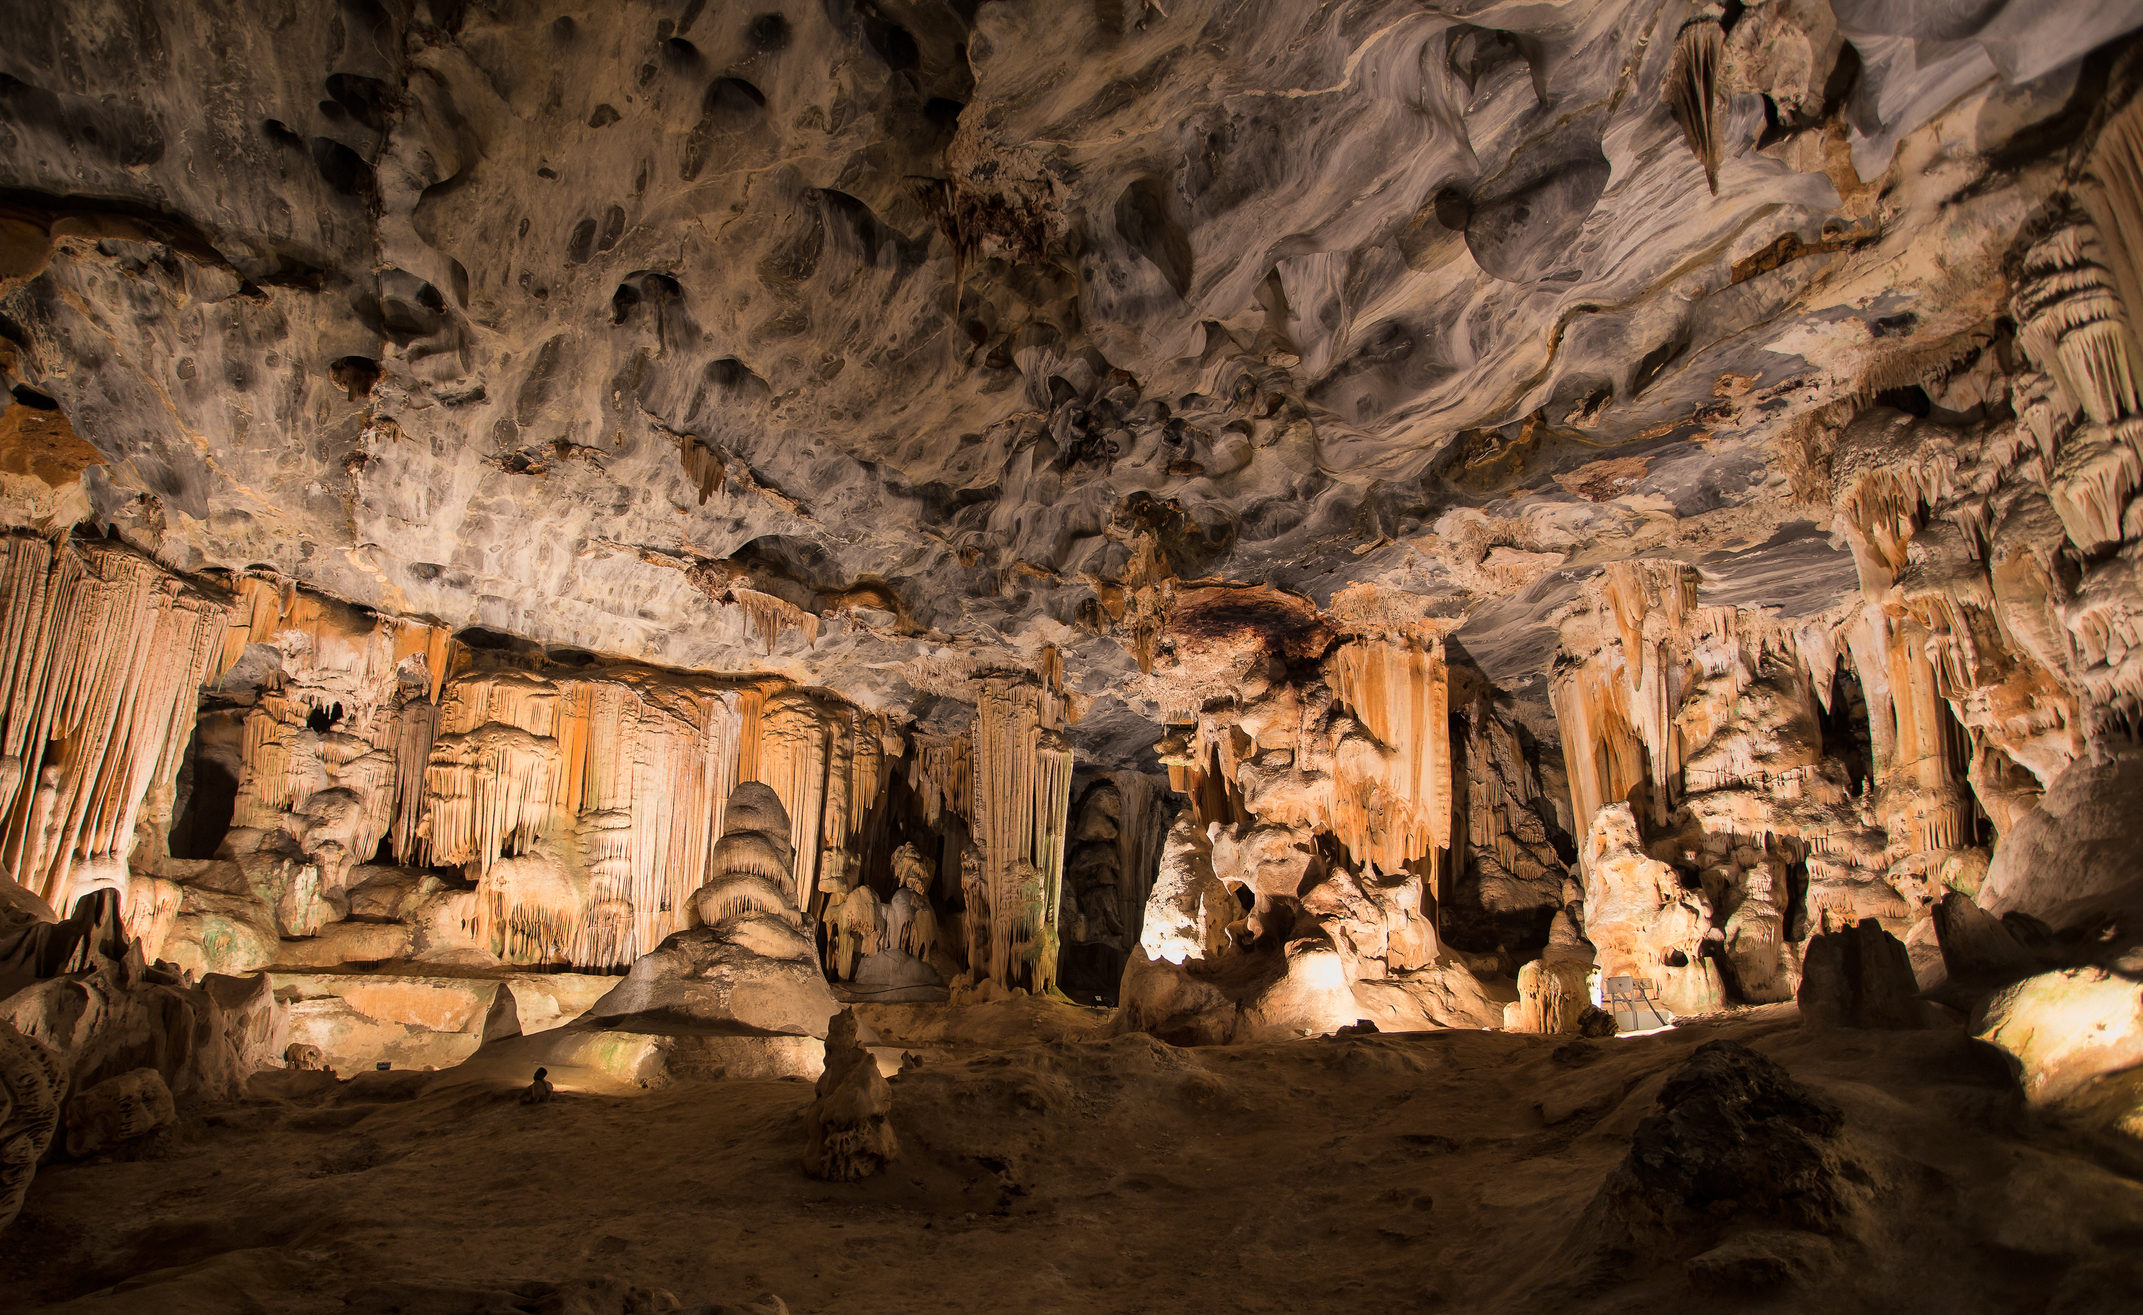 Experience extraordinary landscape like the Cango caves near Oudtshoorn town, South Africa, when you take a tailor-made holiday with Alfred&.